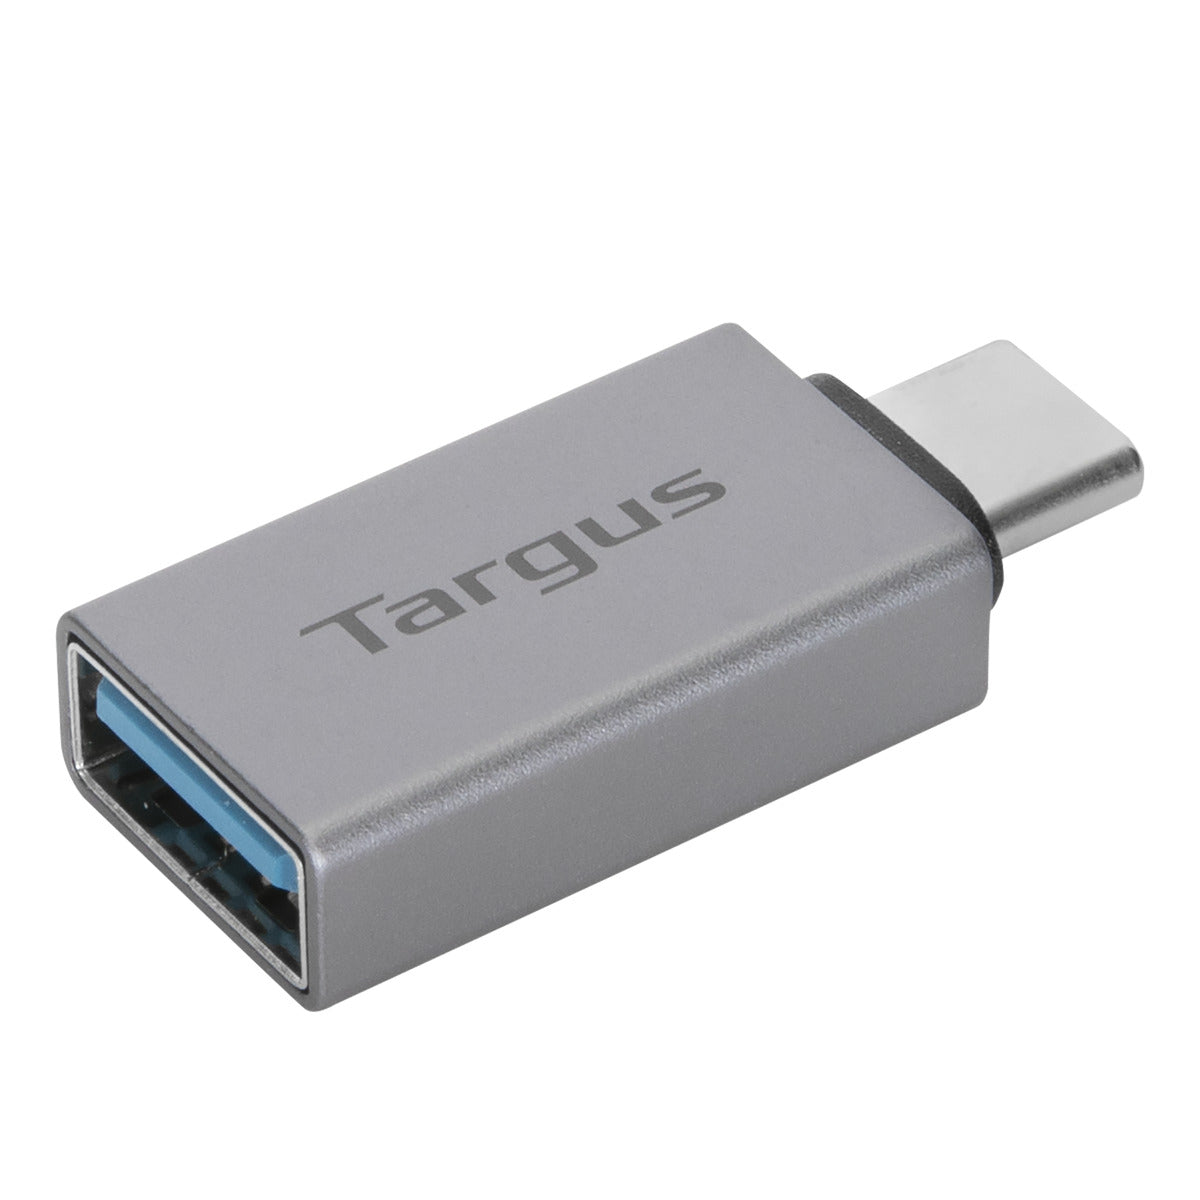 Monoprice Usb-c To Hdmi And Usb-c (f) Dual Port Adapter, Compatible With  Usb-c Equipped Laptops, Such As The Apple Macbook And Google Chromebook :  Target